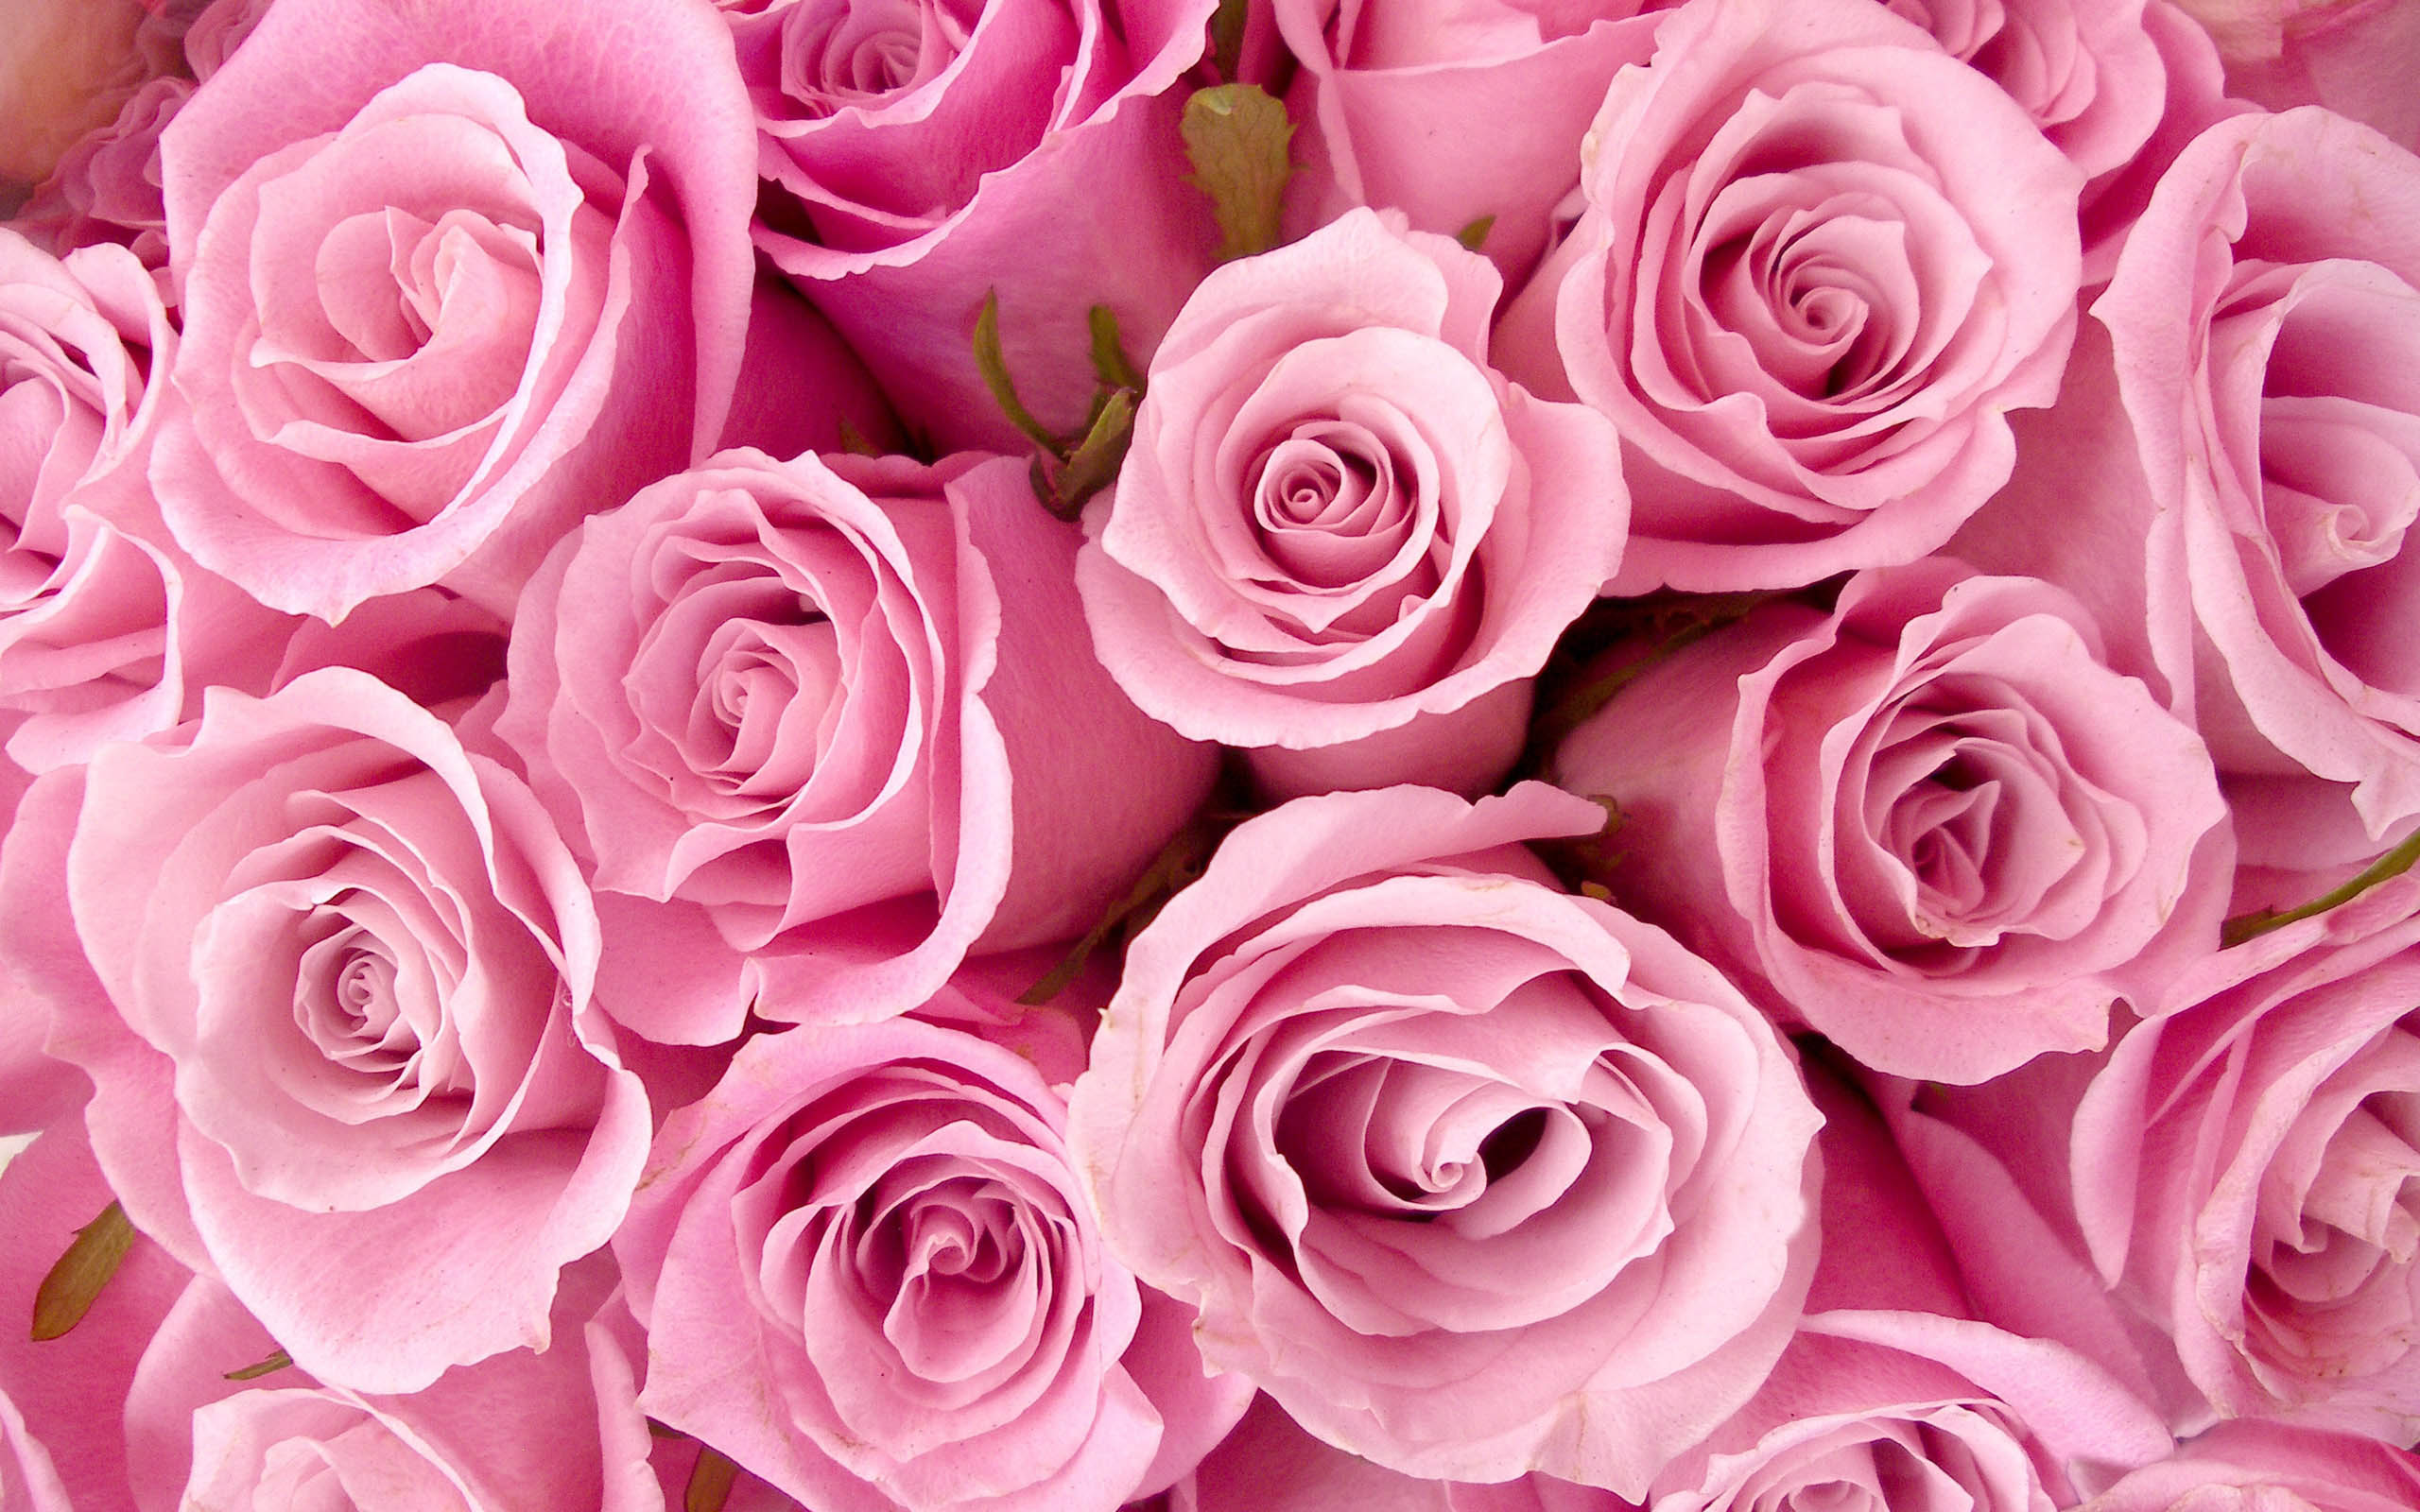 Roses Wallpaper Pink Fishes Girly Hot